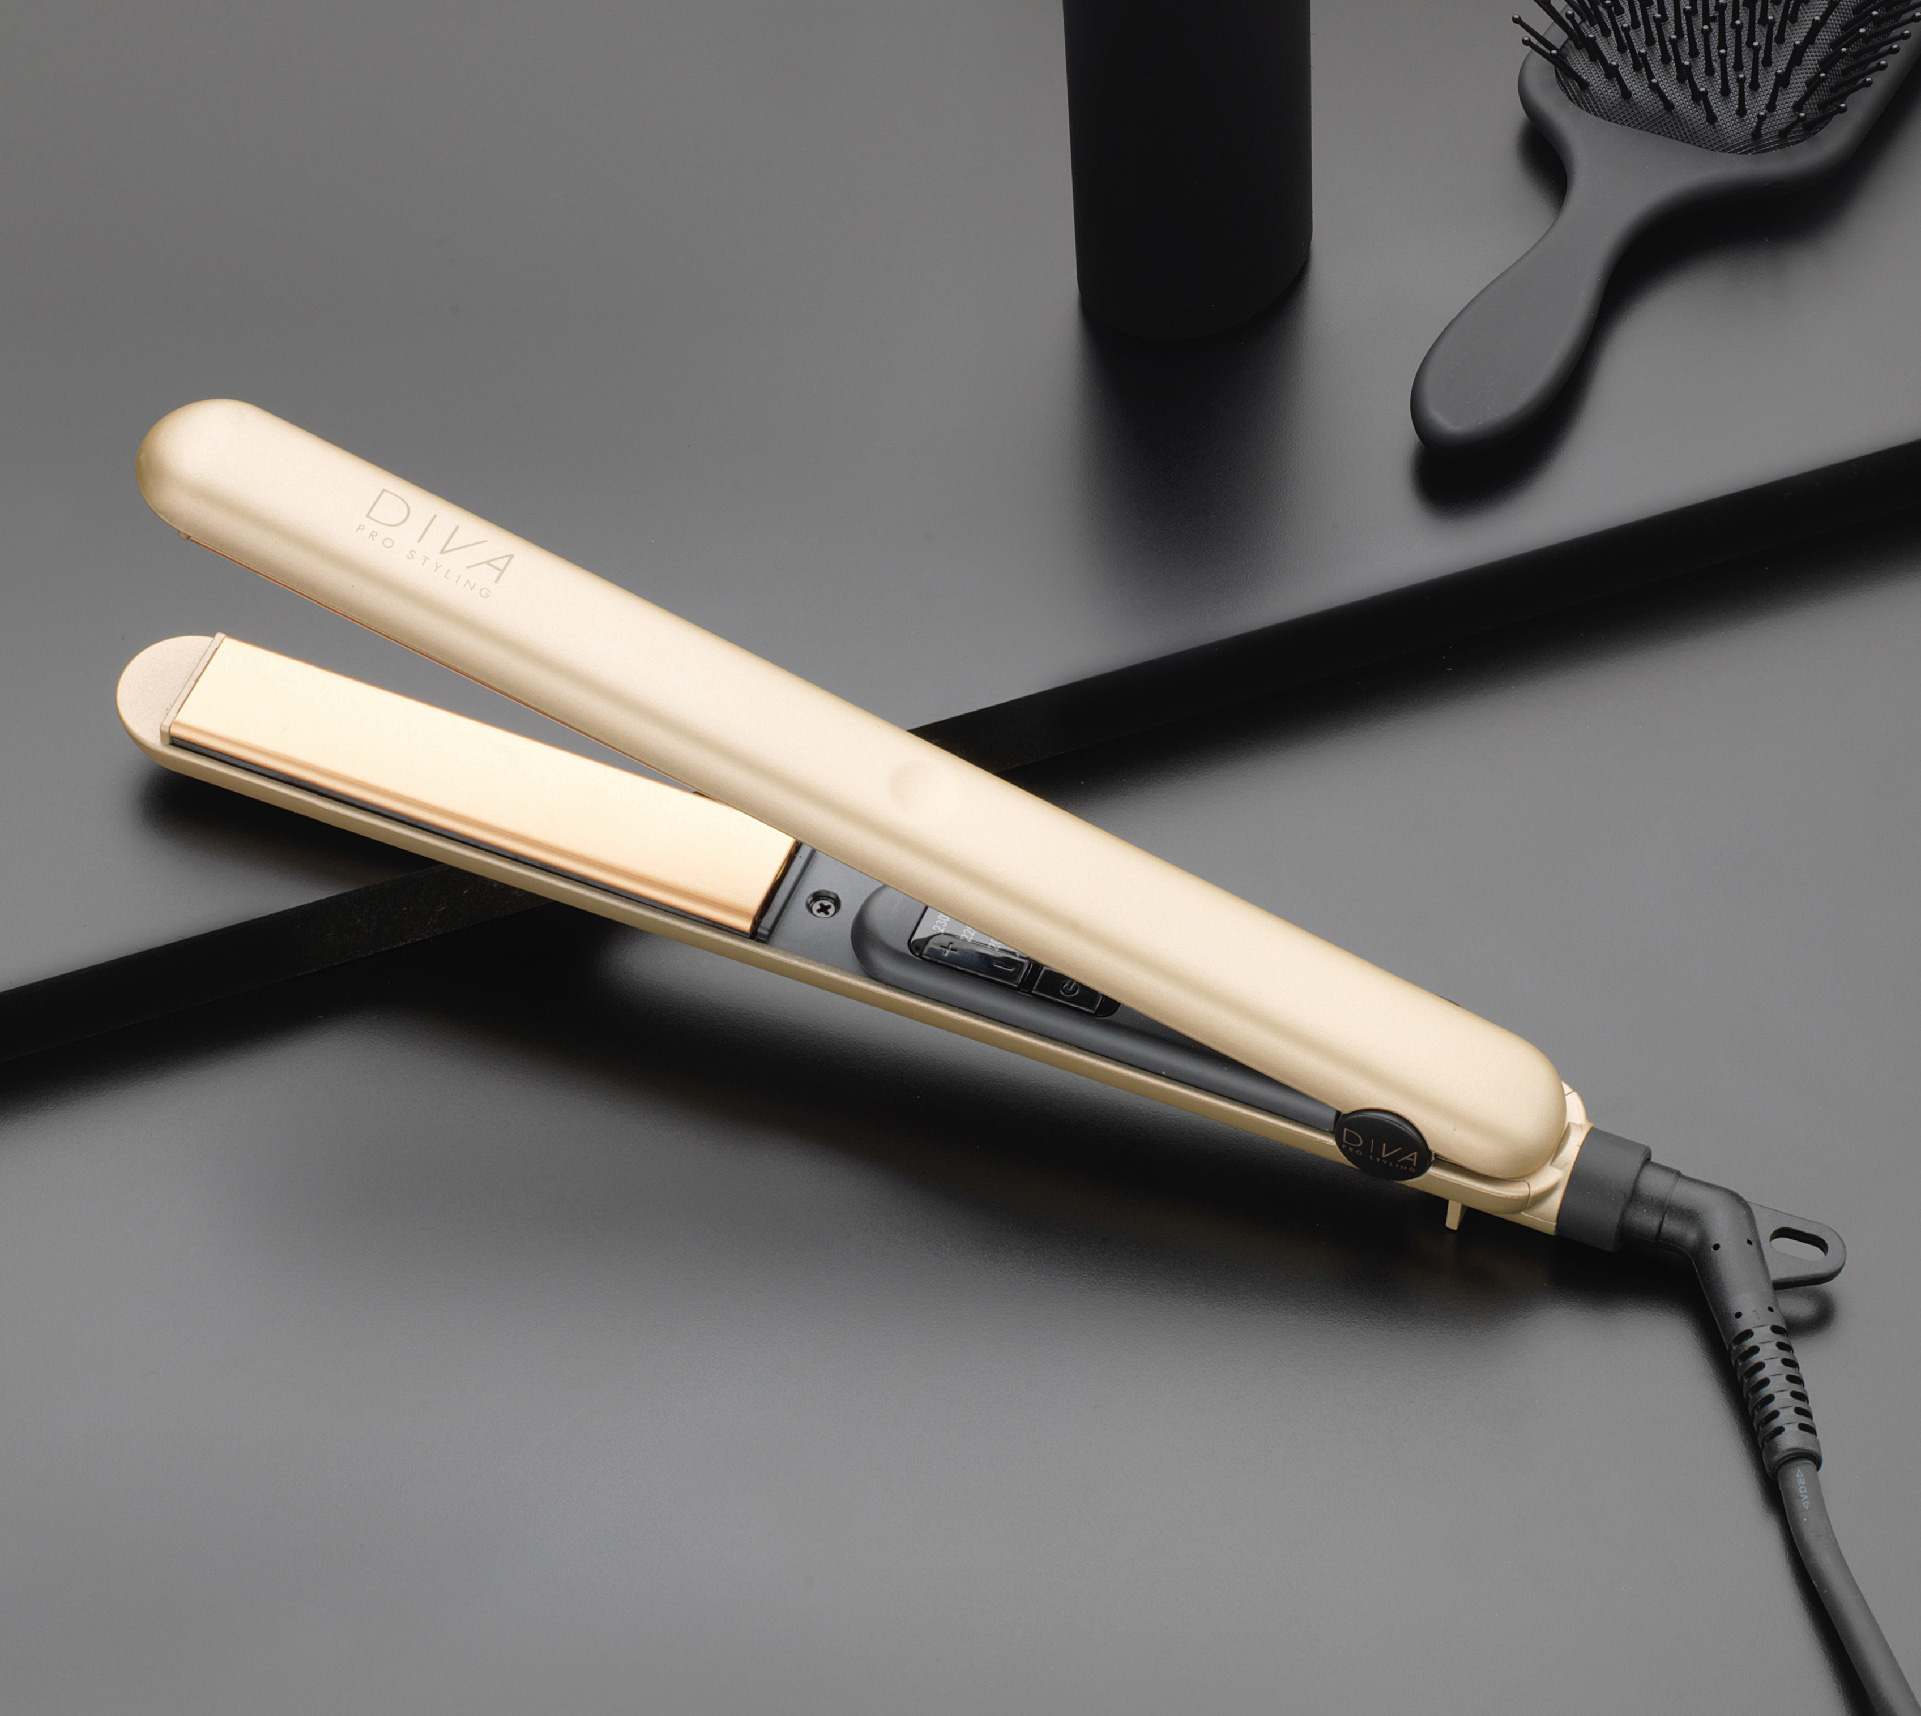 Diva Hairdressing tools